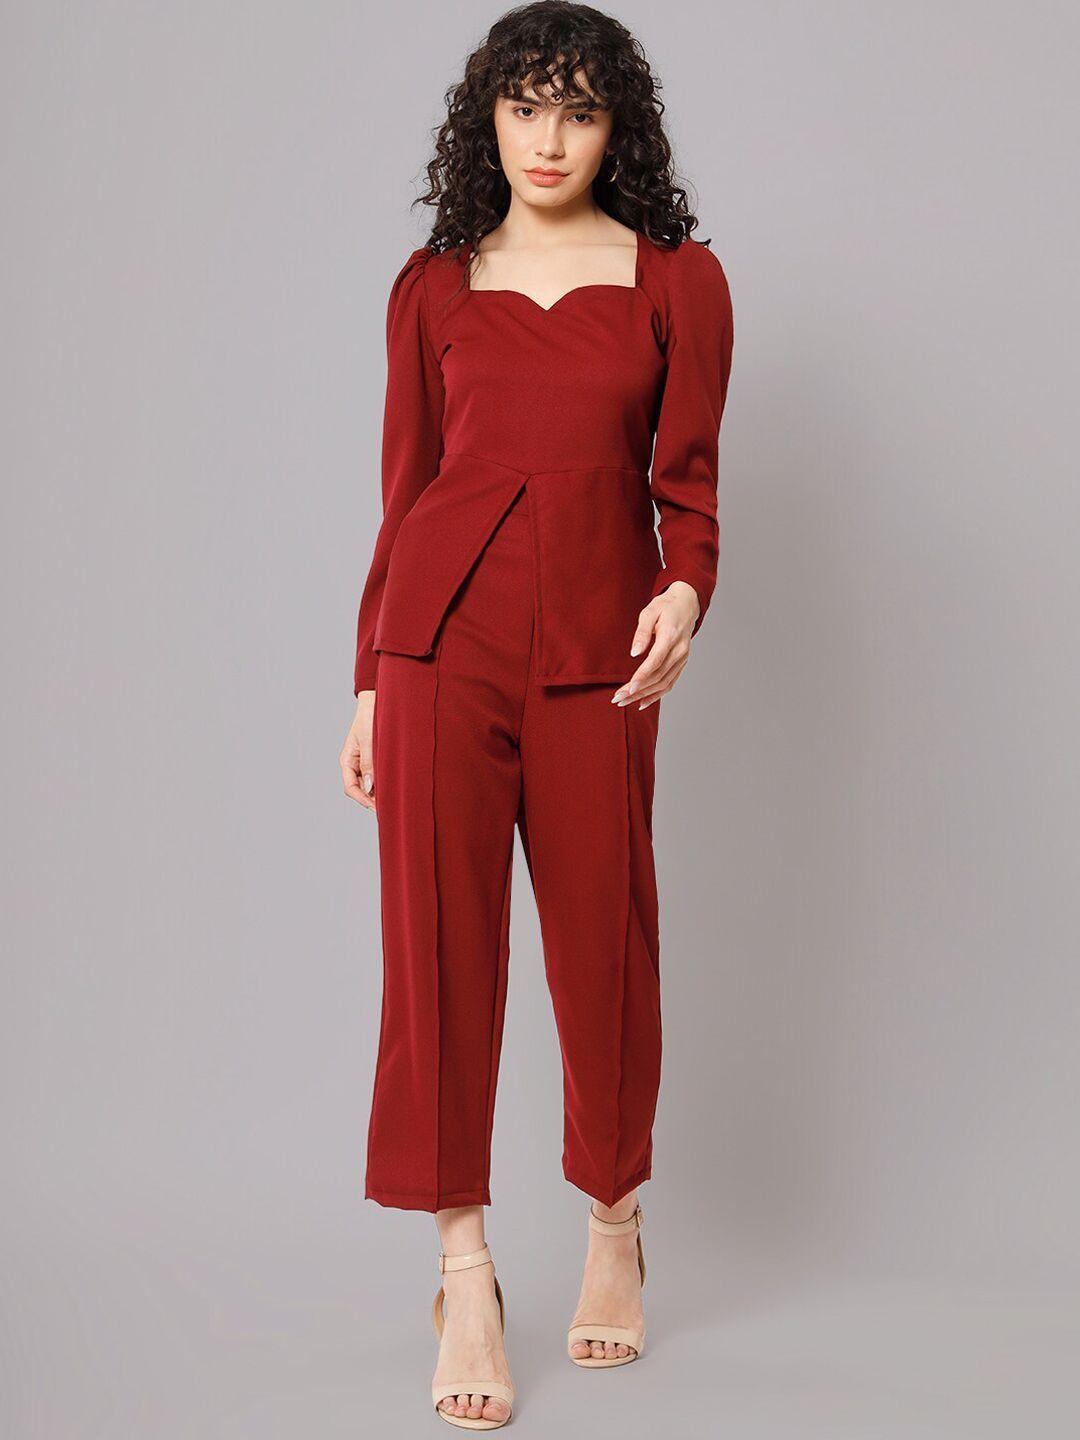 bcz style sweetheart neck long sleeve top with trousers